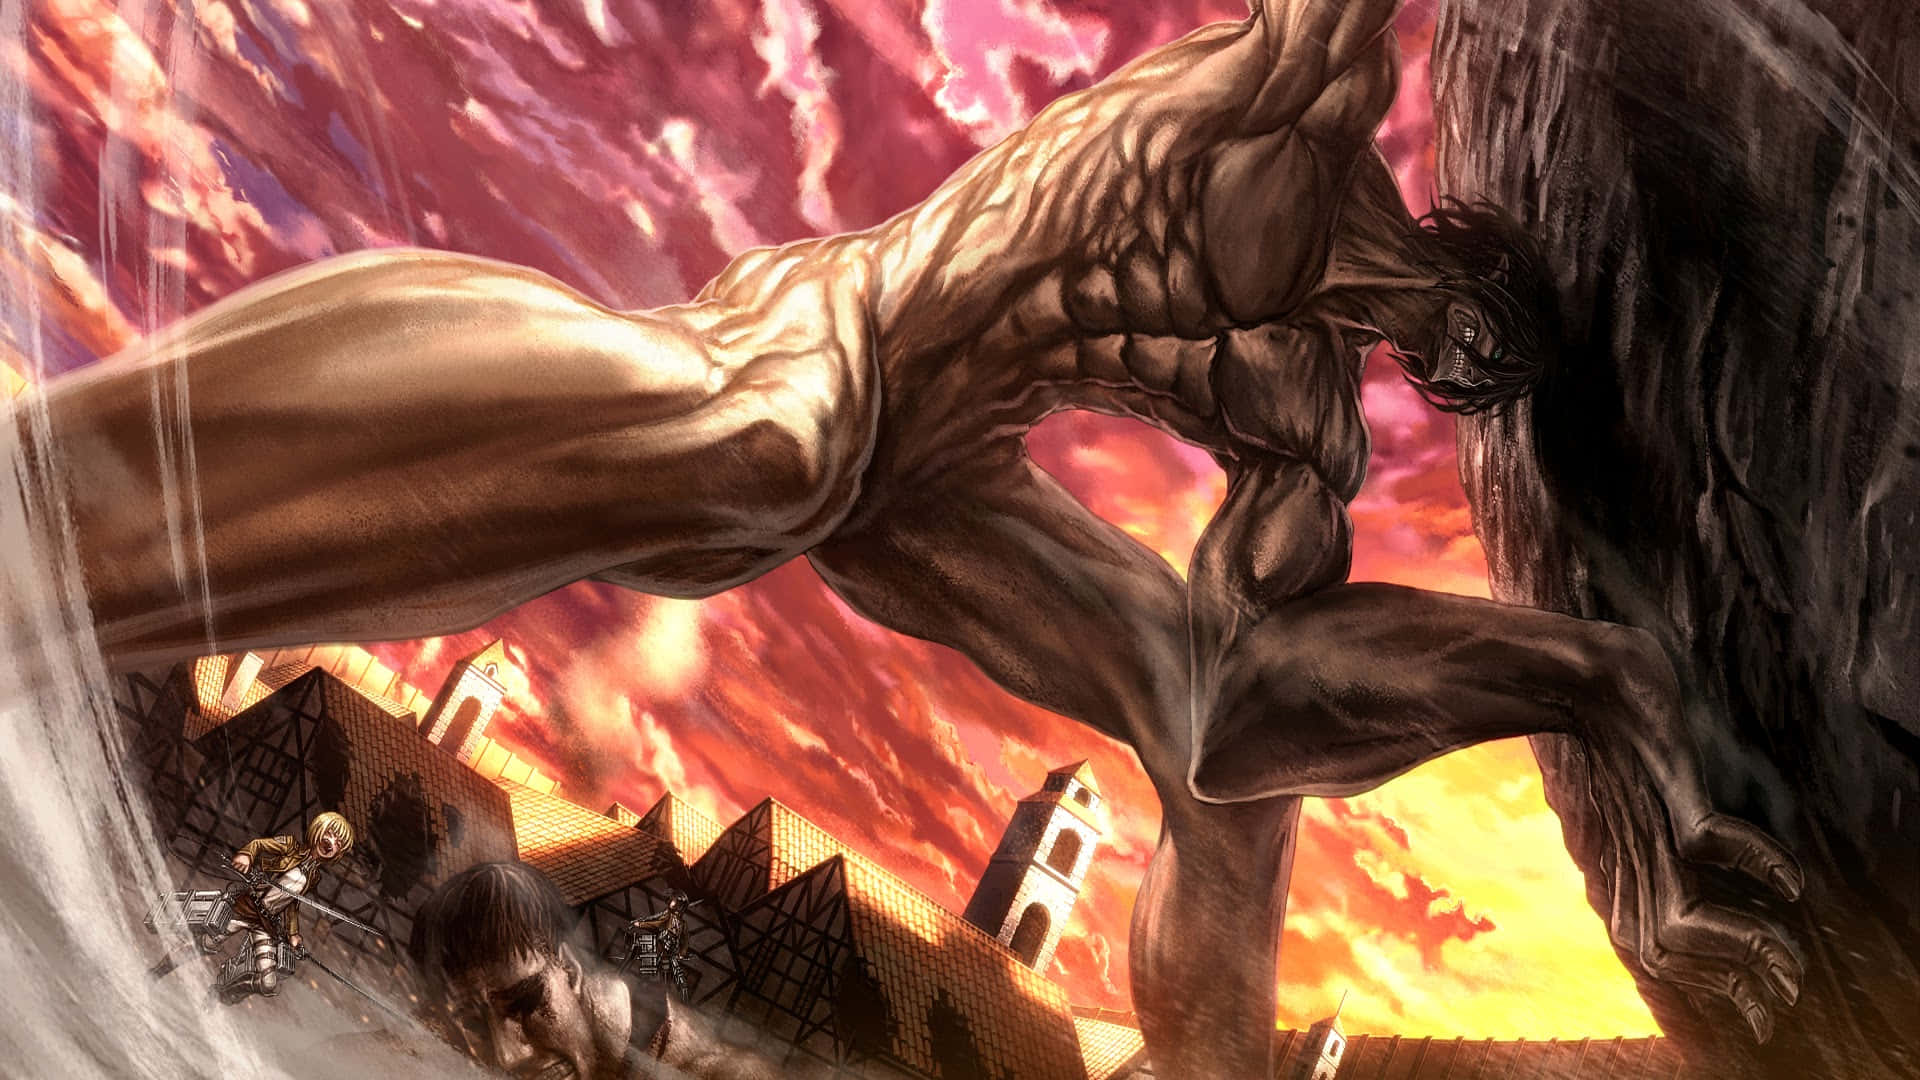 An intimidating giant creature stands tall among the cityscape. Wallpaper